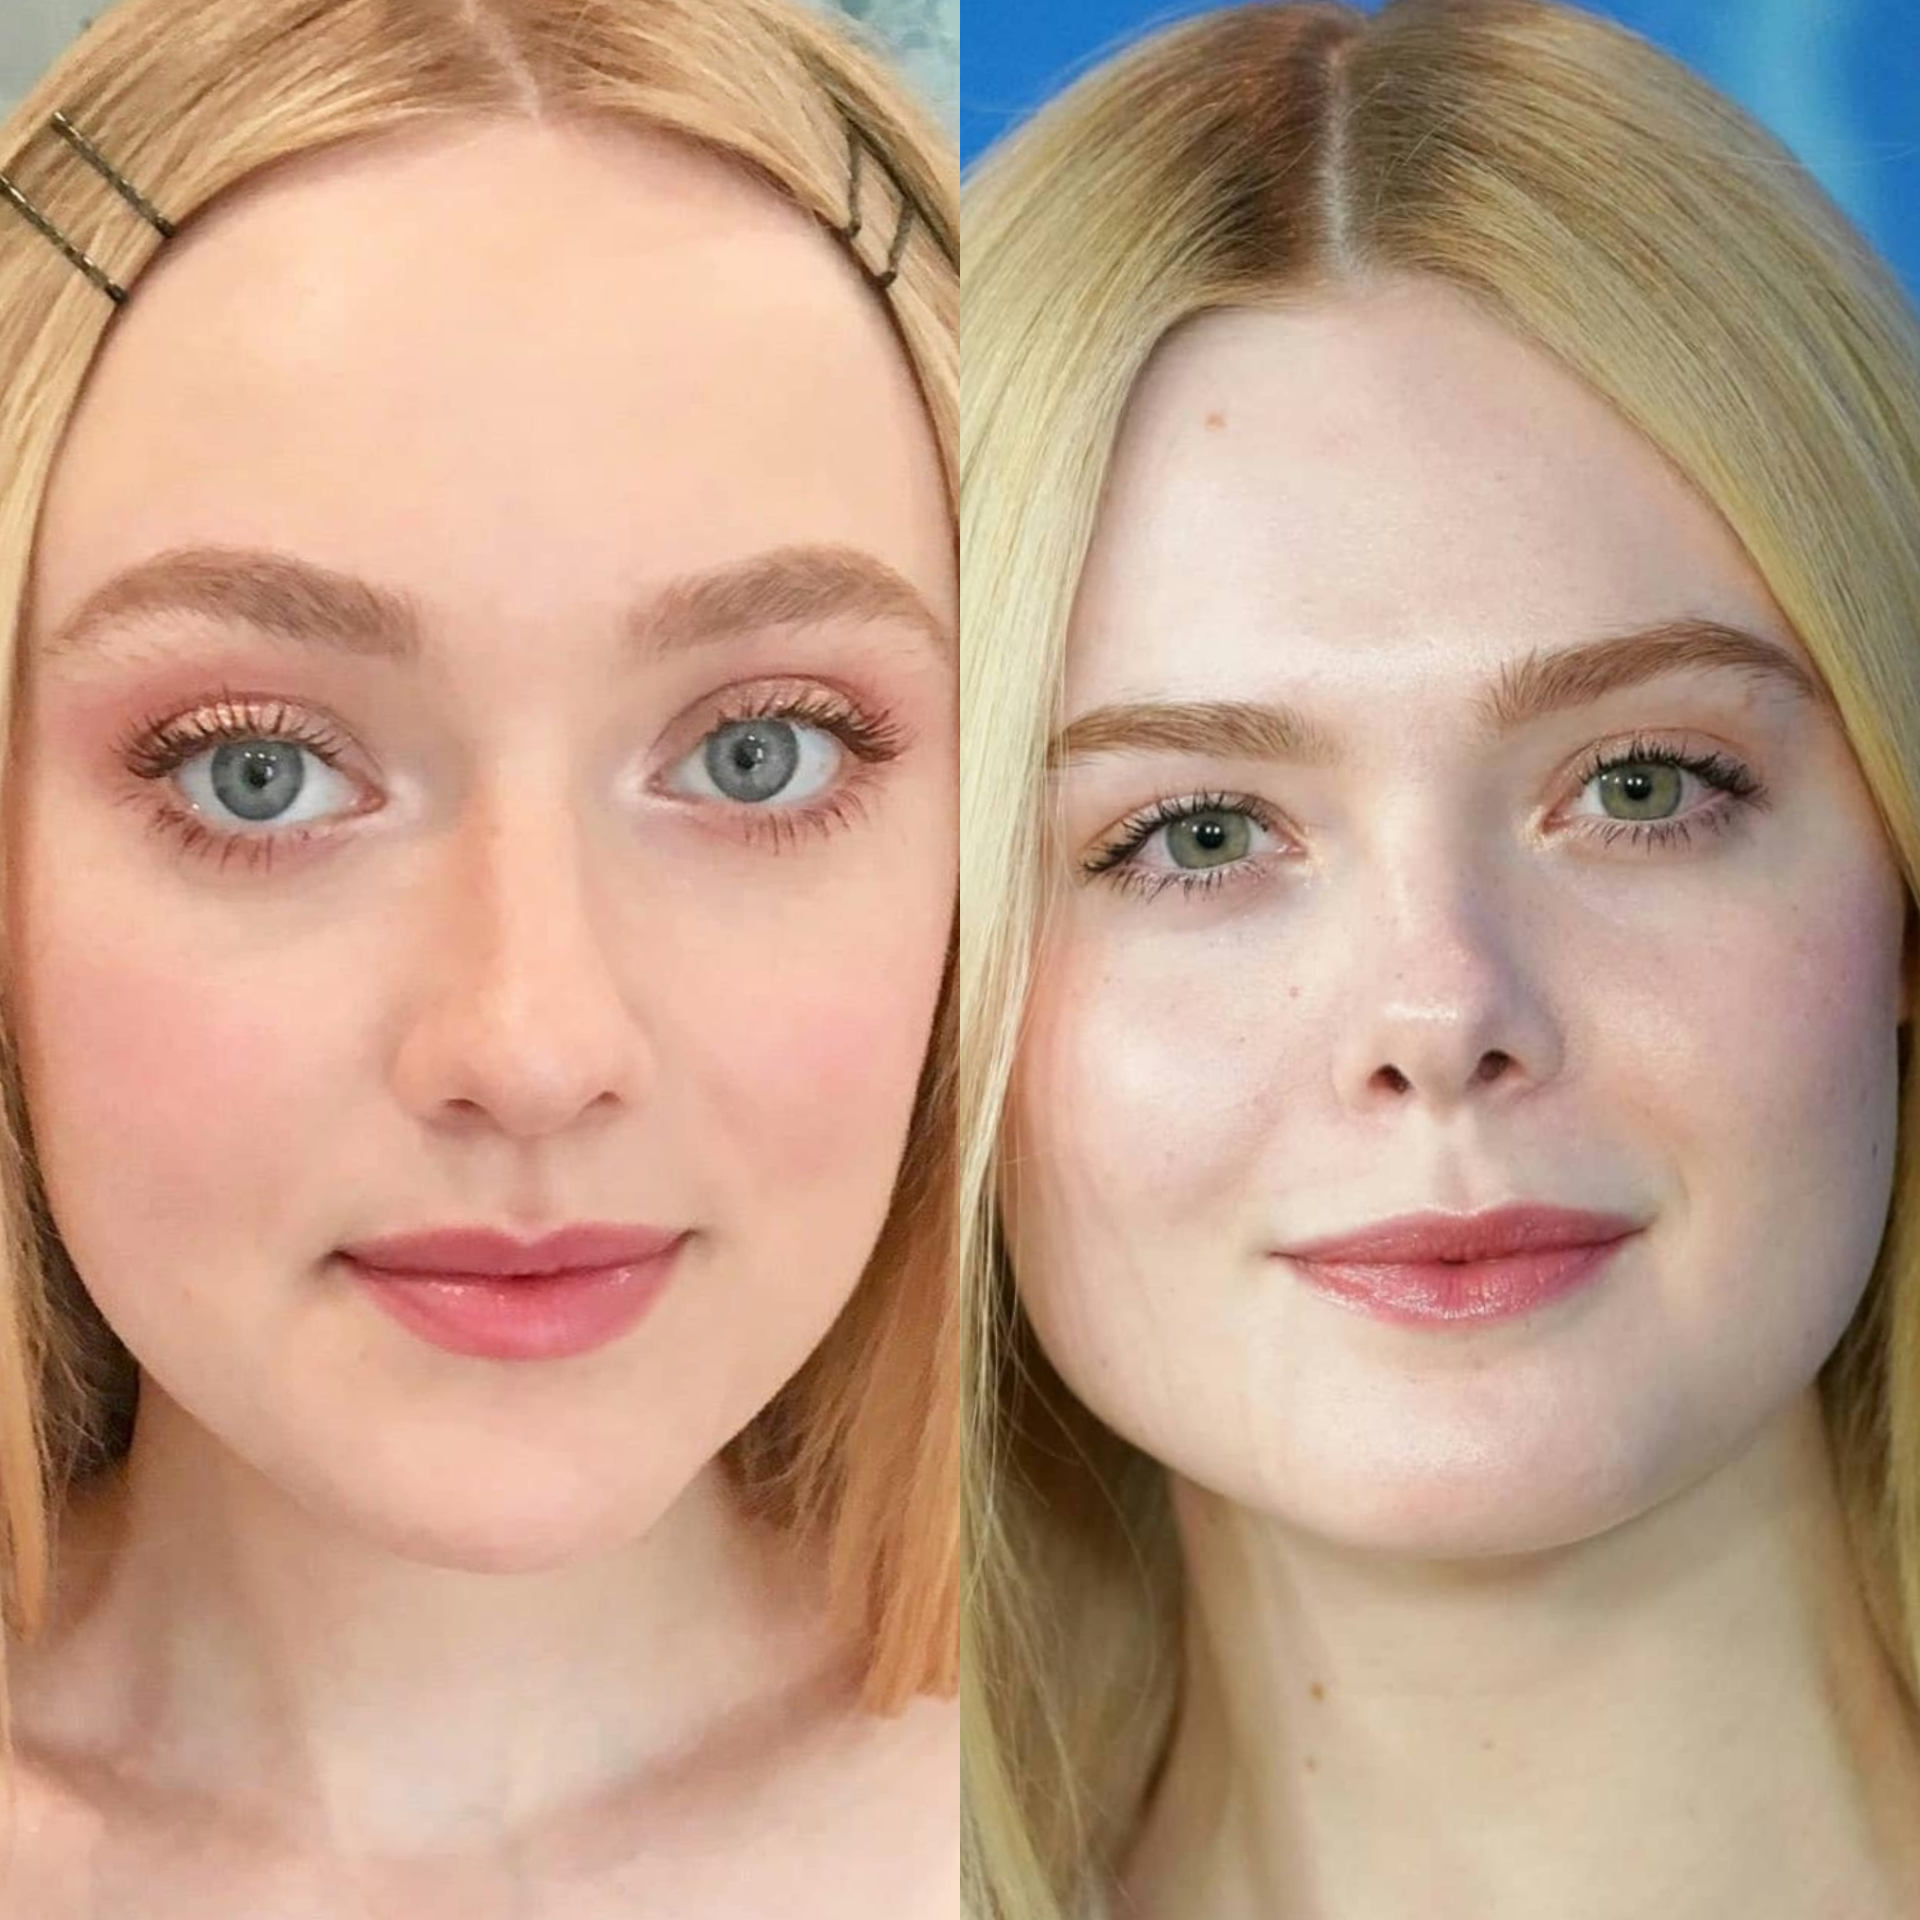 Dakota And Elle Fanning Which Fanning Sister Would You Rather 1 Marry And Have Nightly Sensual 